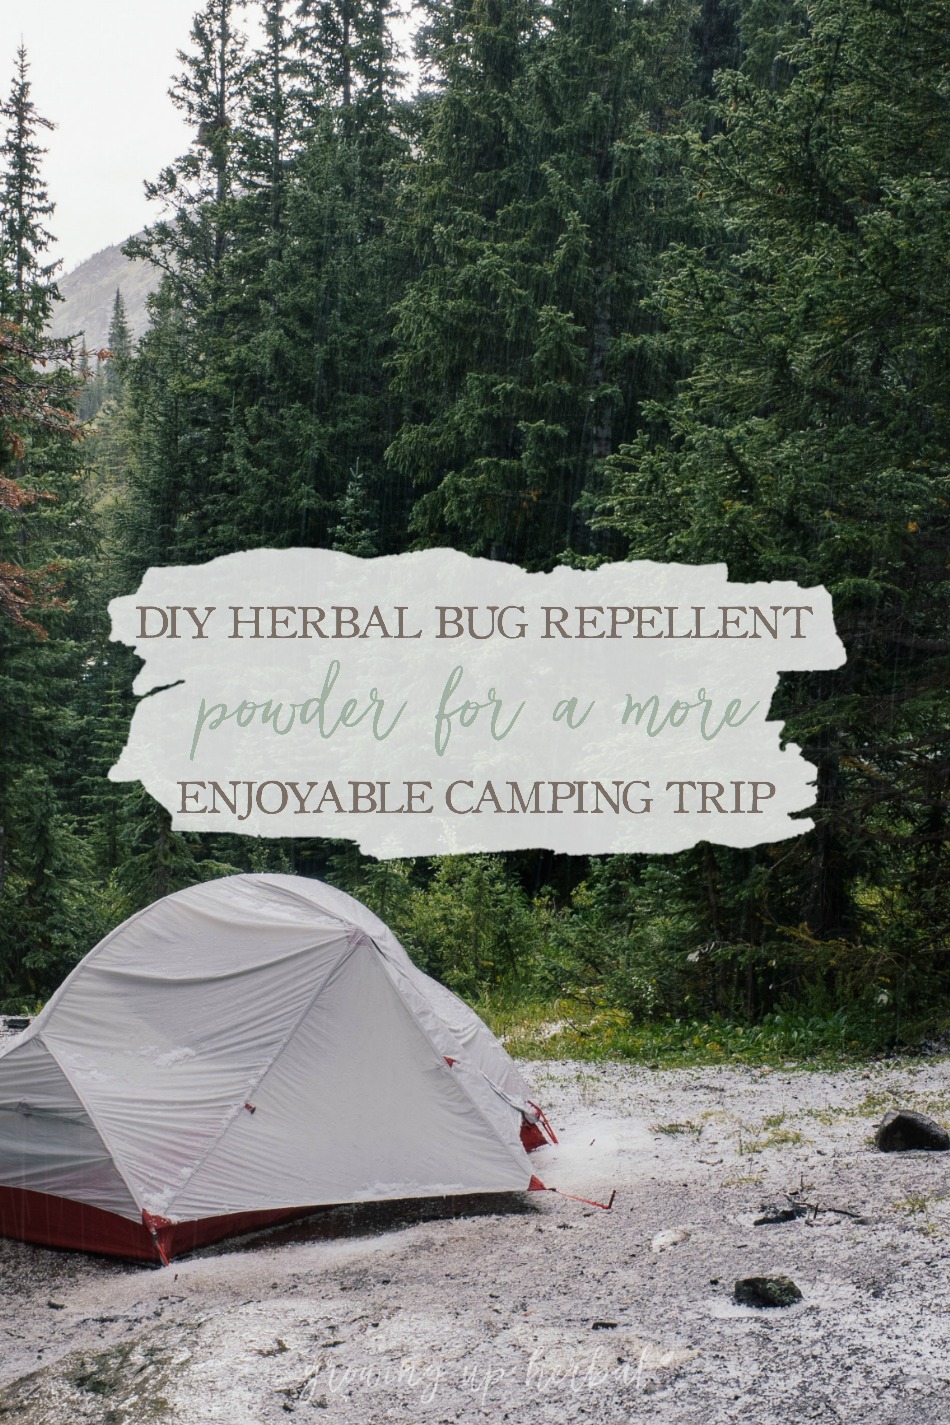 DIY Herbal Bug Repellent Powder For A More Enjoyable Camping Trip | Growing Up Herbal | Are pesky bugs ruining your time outdoors? All you need to make this DIY herbal bug repellent powder is a few ingredients. You'll soon be on your way to a more enjoyable camping trip!